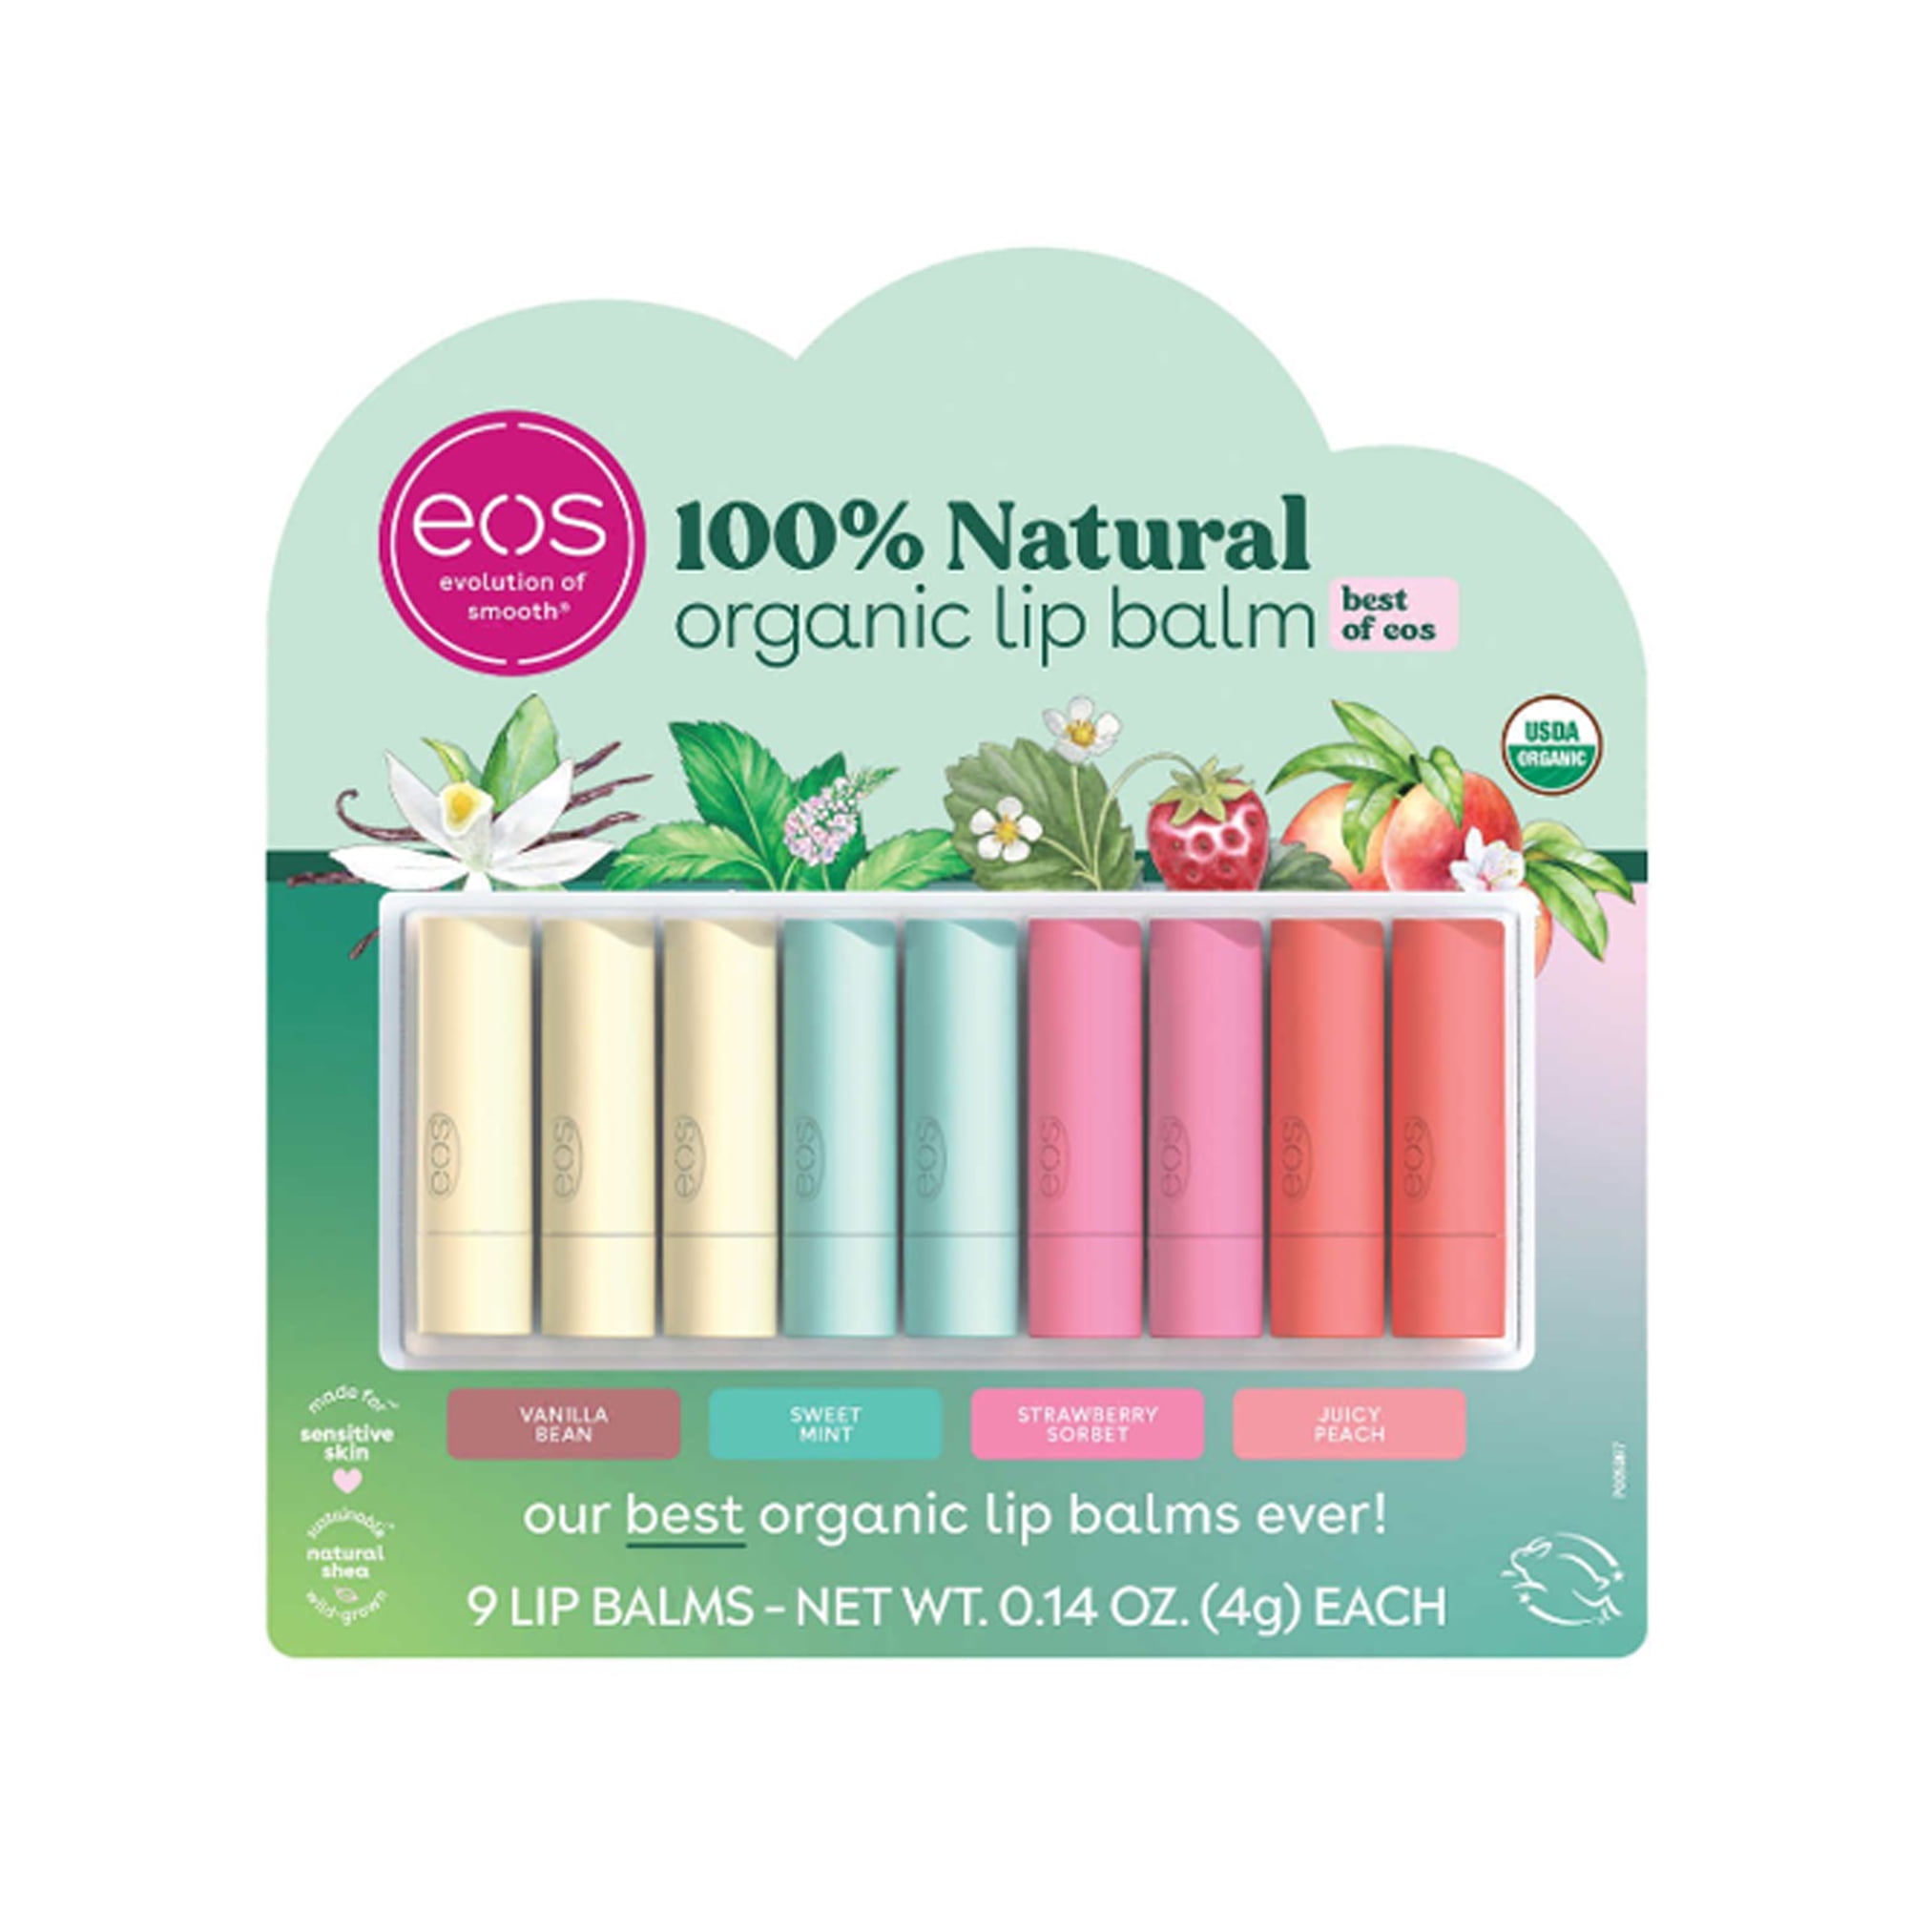 Organic Lip Balm - new scents! — Autumn Rose Handcrafted